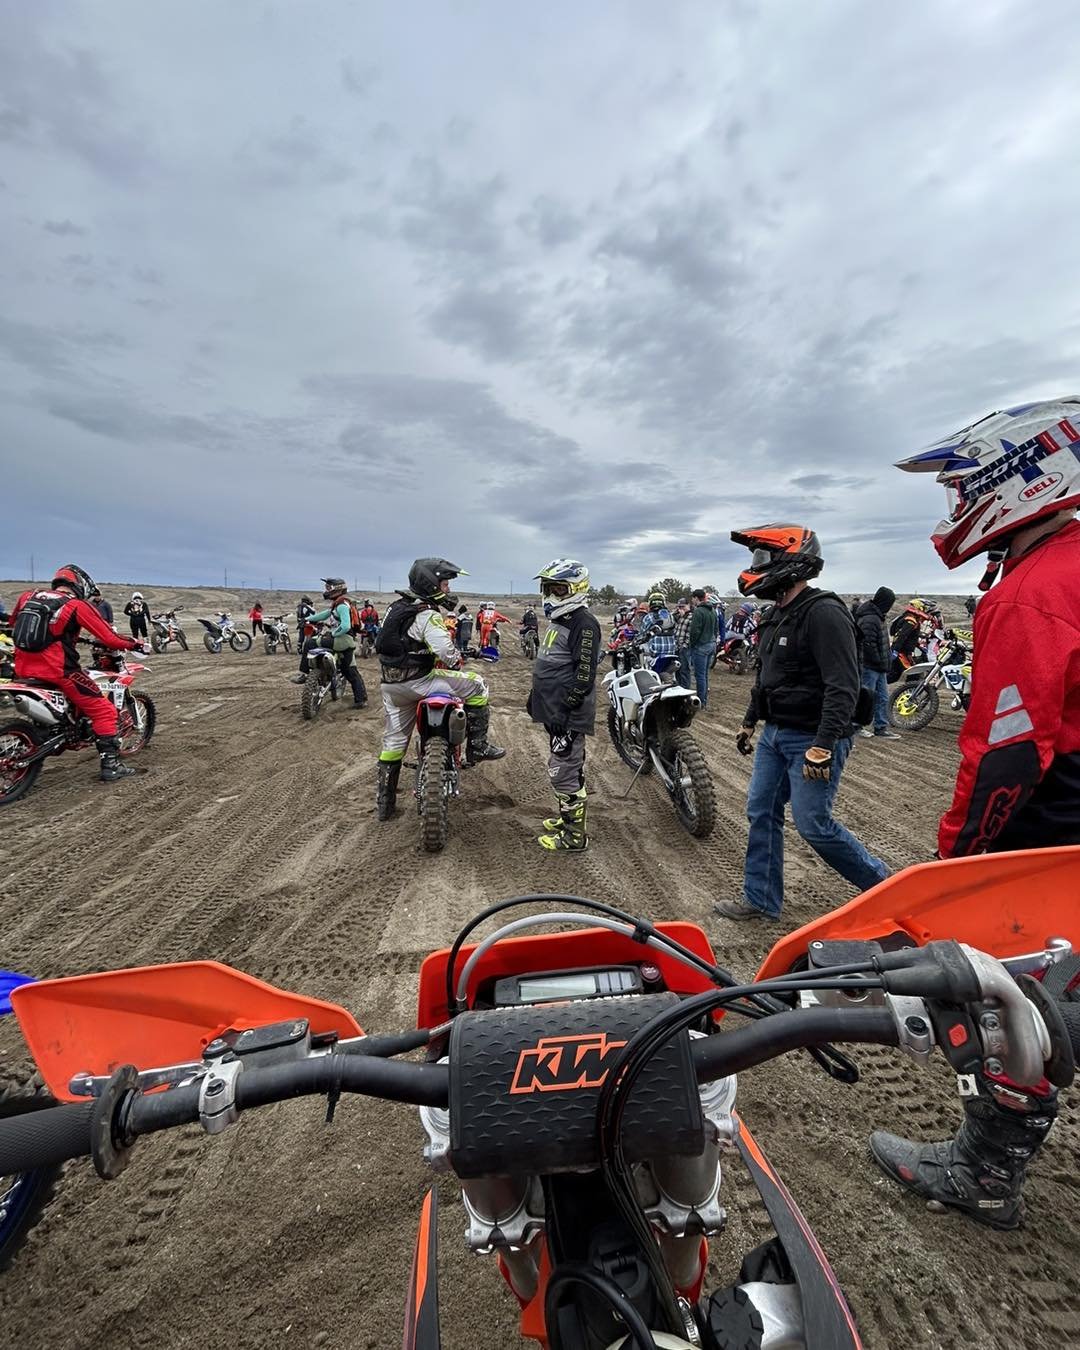 Who else is excited race season is back? A little old but some starting line shots from the NMA race at Horn-rapids! You could have been there on one of your bikes! 
#ktm #300xcw #dirt #dirtbikes #adventure #dirtbike #washington #bike #dirtbikerental